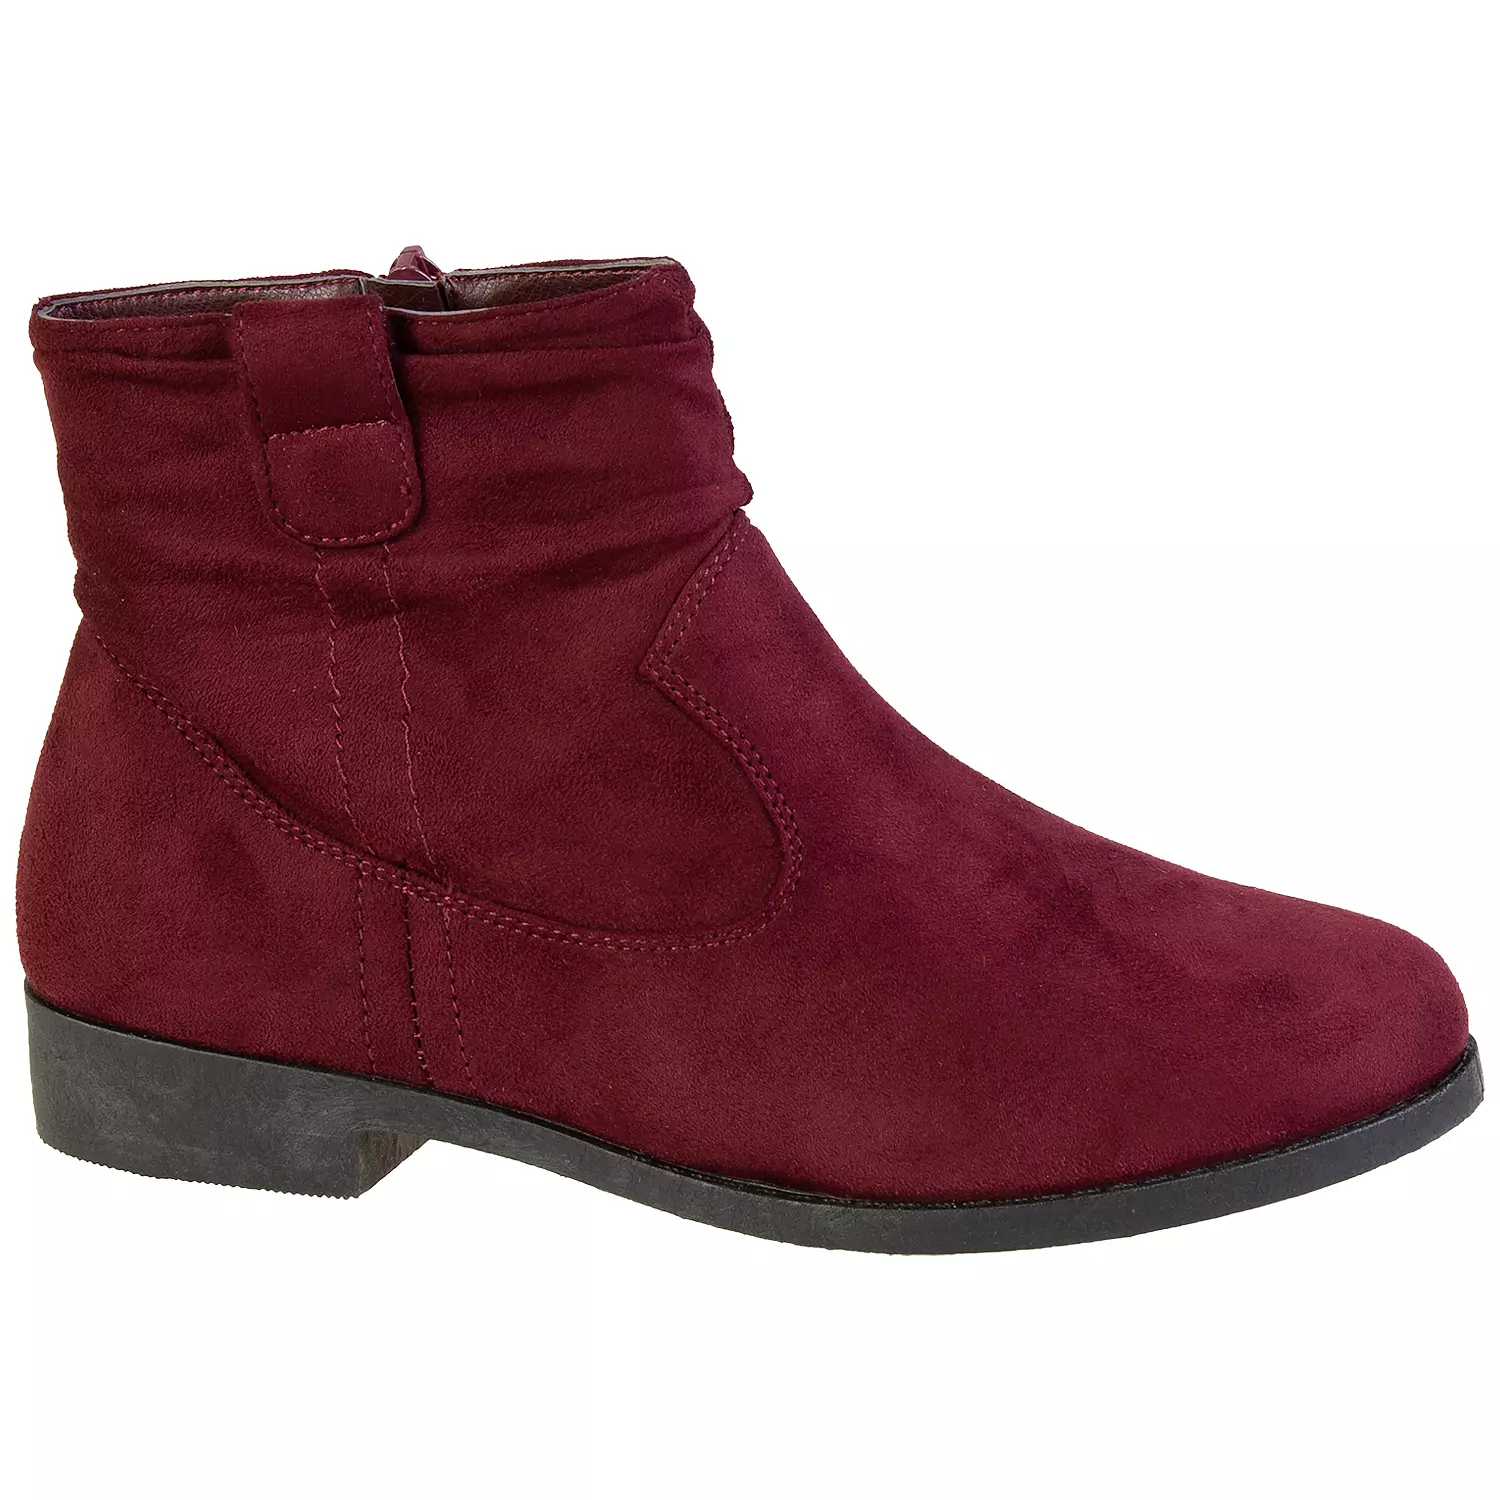 Women's slouch ankle boots with side tabs, burgundy, size 6